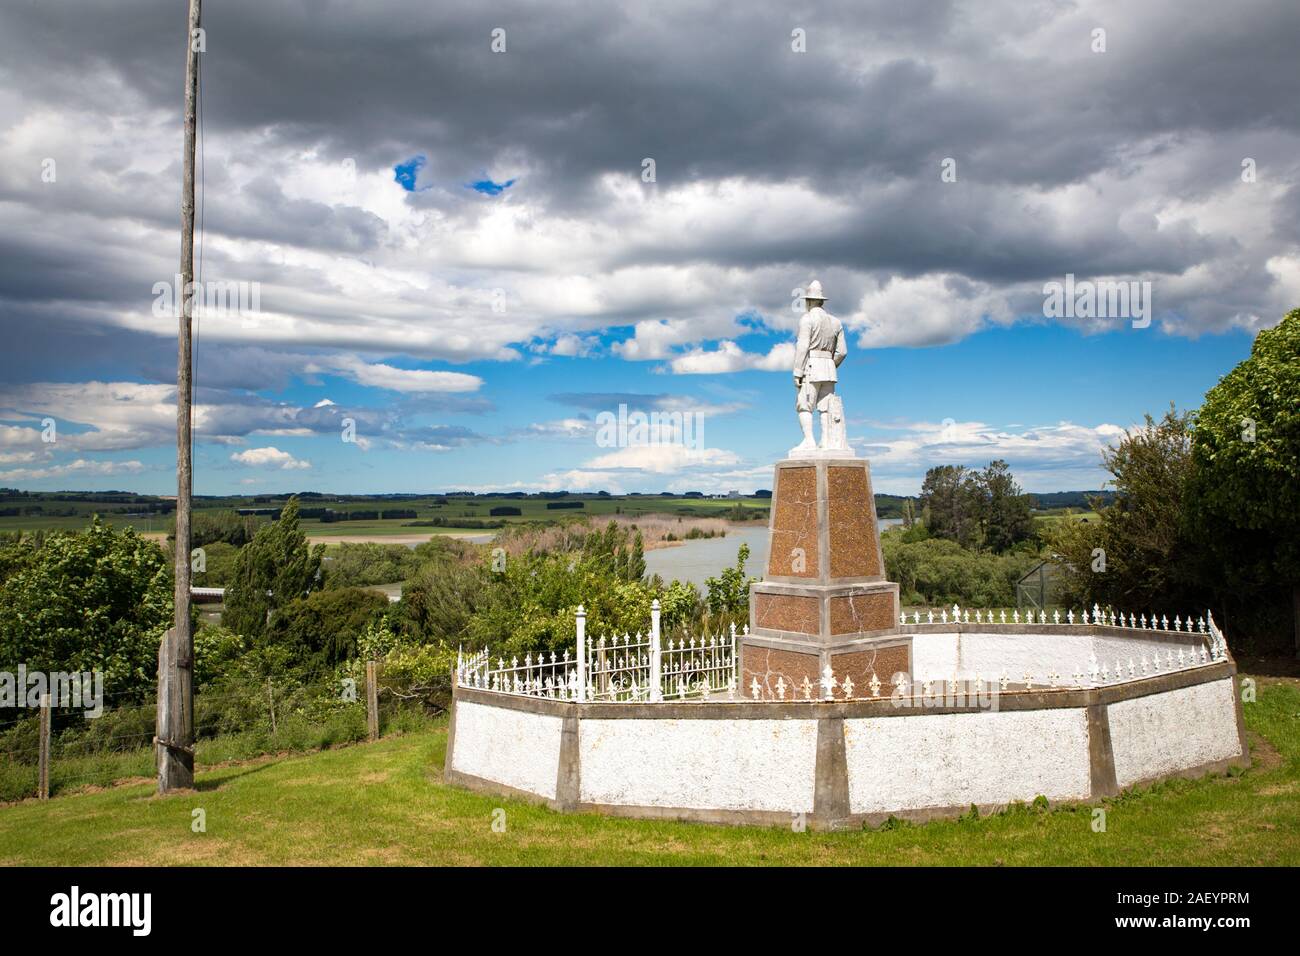 Otago, South Island, New Zealand, December 8 2019:  A war memorial to remember fallen soldiers stands proud on a hilltop overlooking the Clutha River, Stock Photo